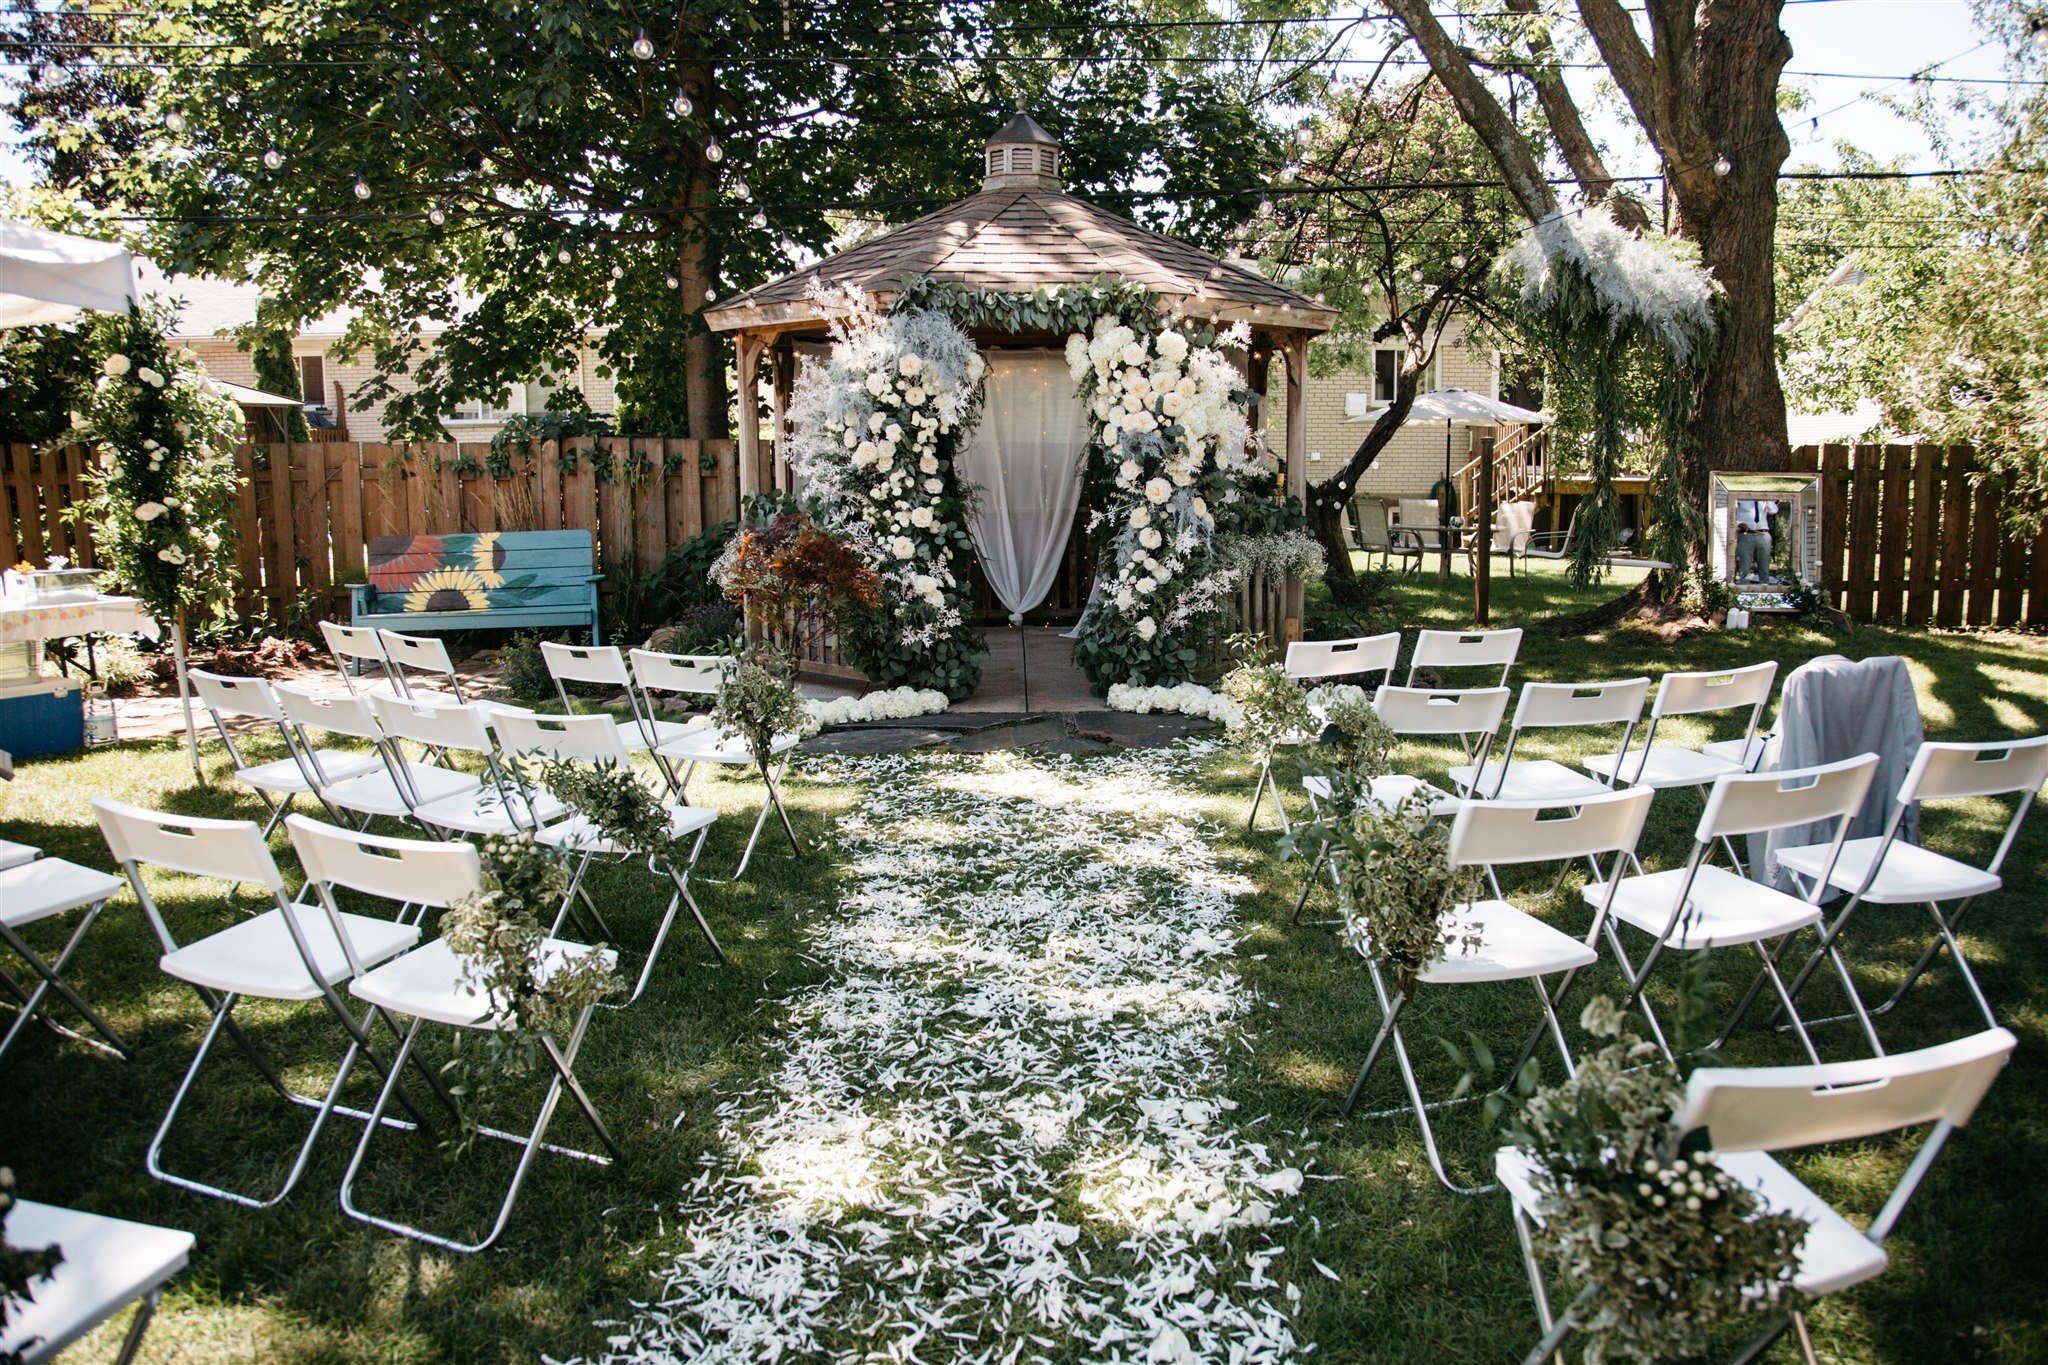 Backyard decorations for wedding in Montreal.